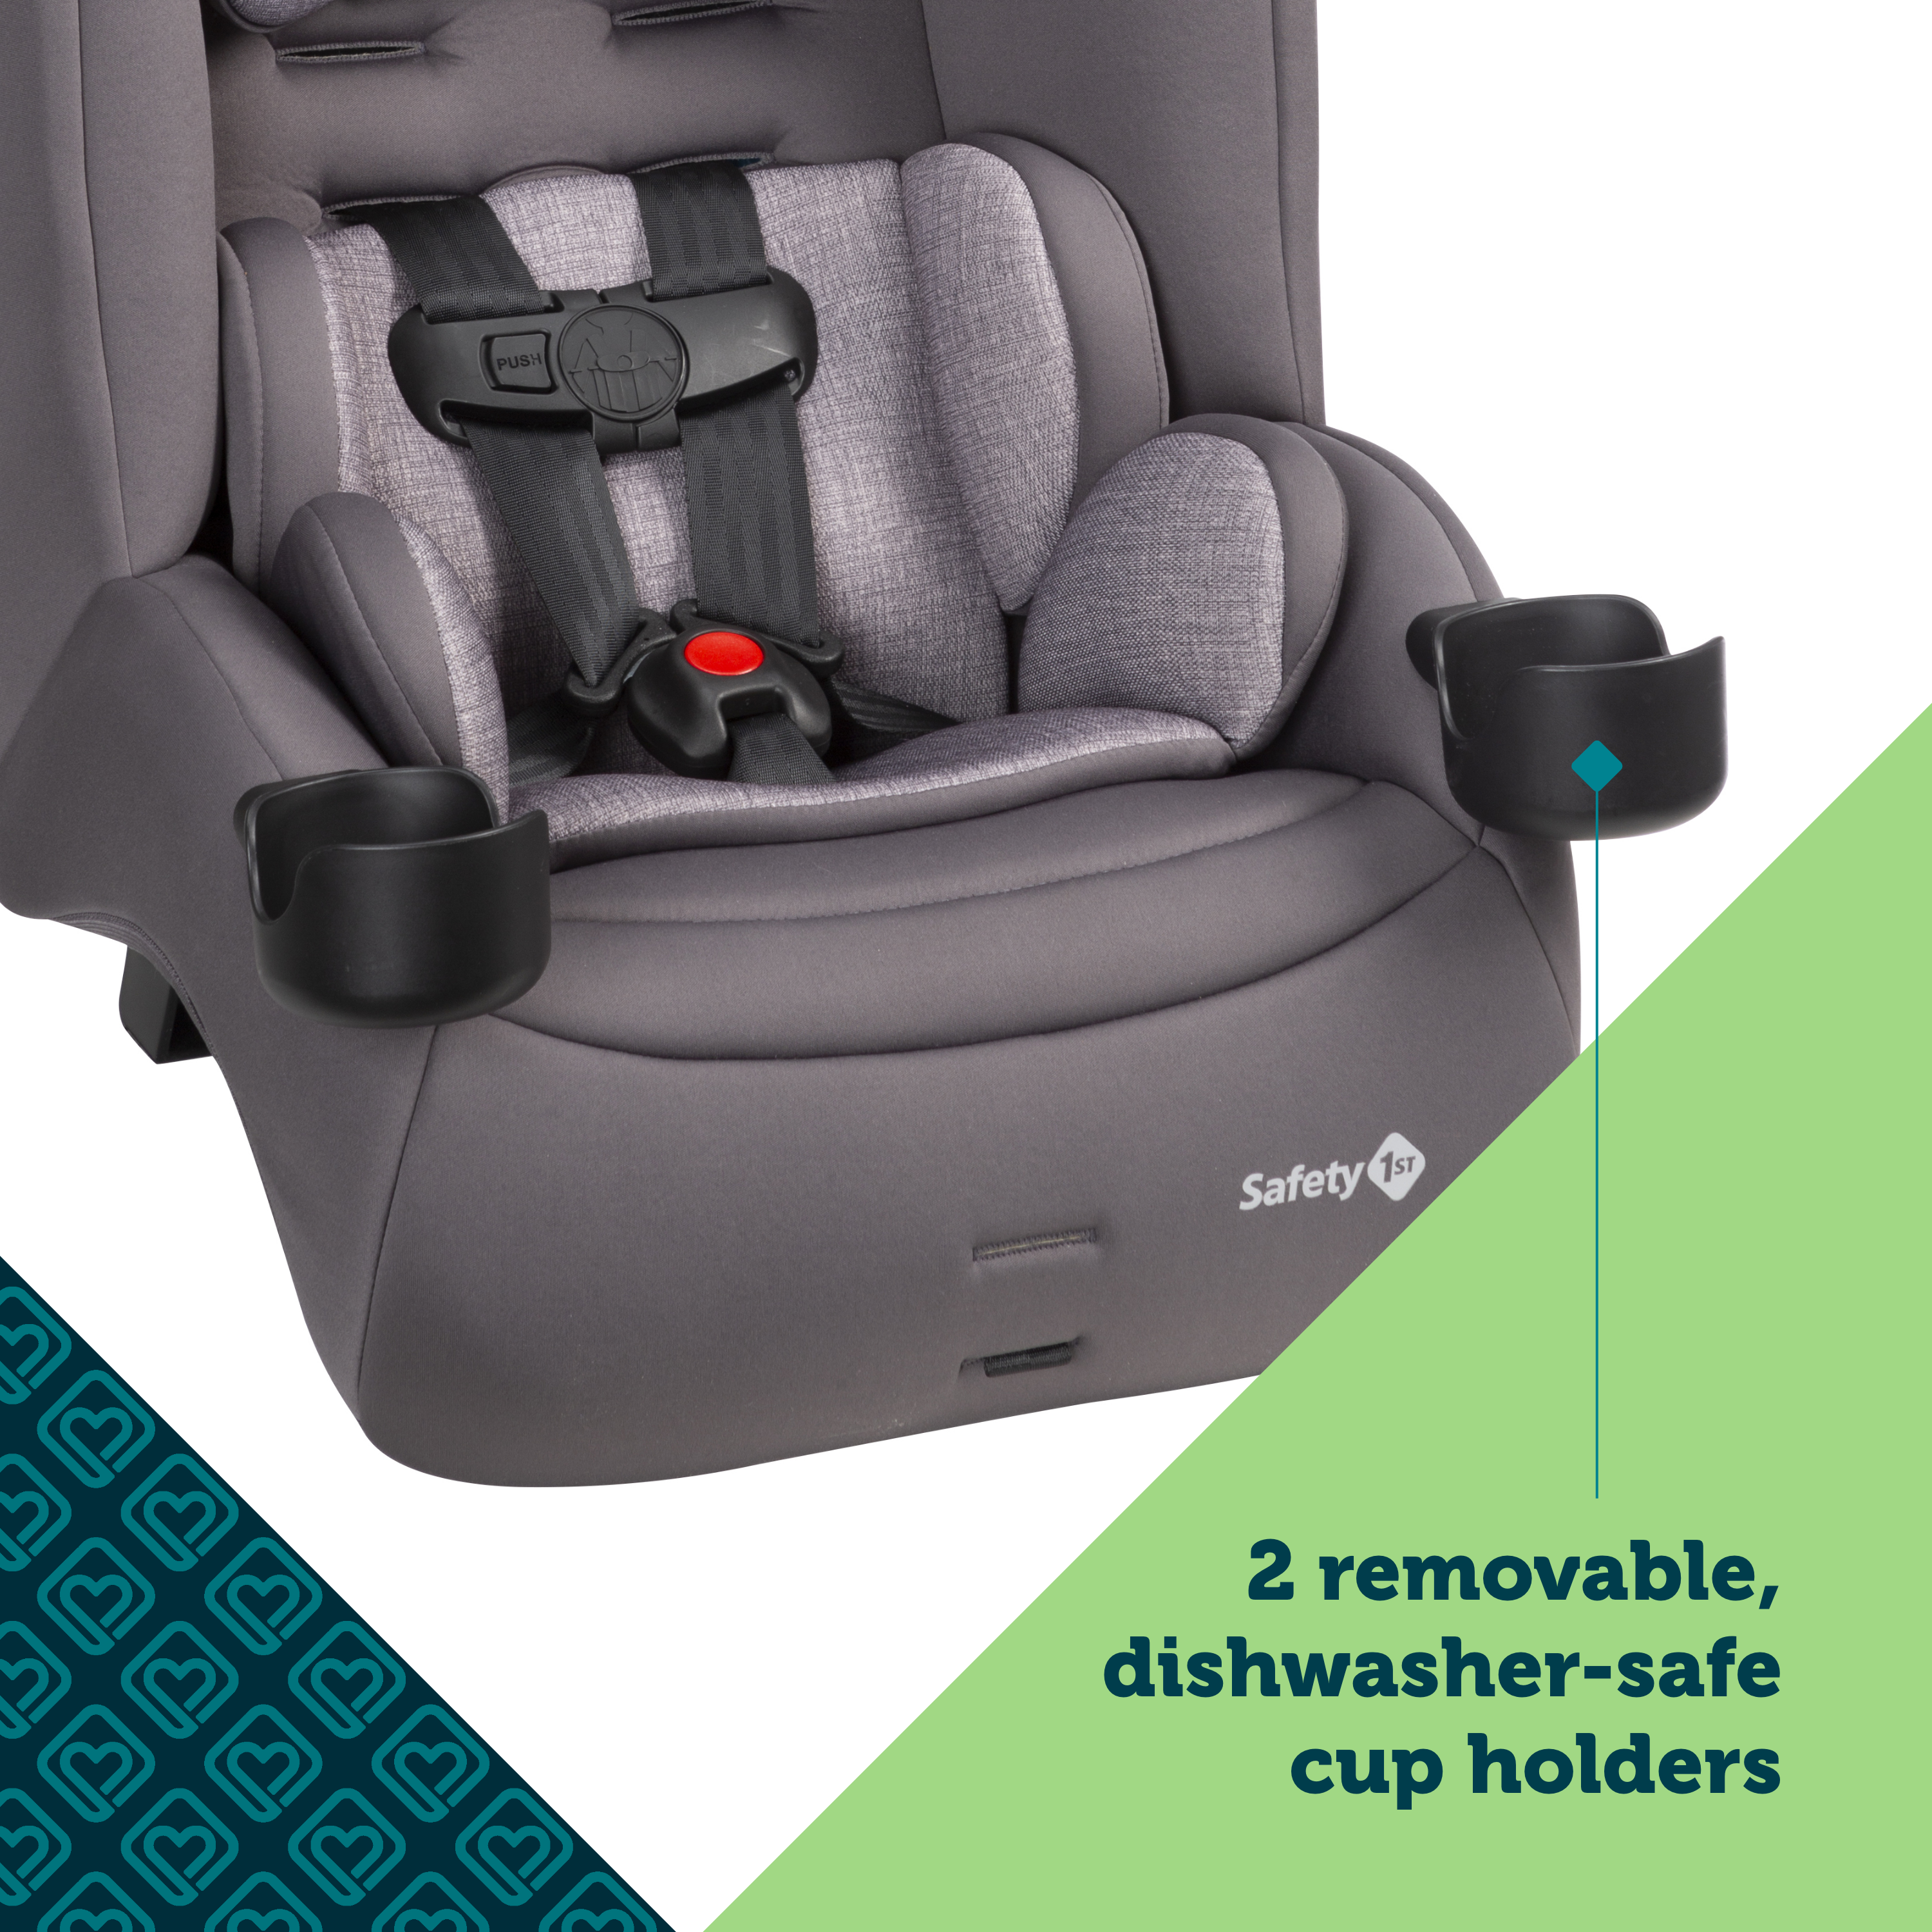 Jive 2-in-1 Convertible Car Seat - 2 removable, dishwasher-safe cup holders